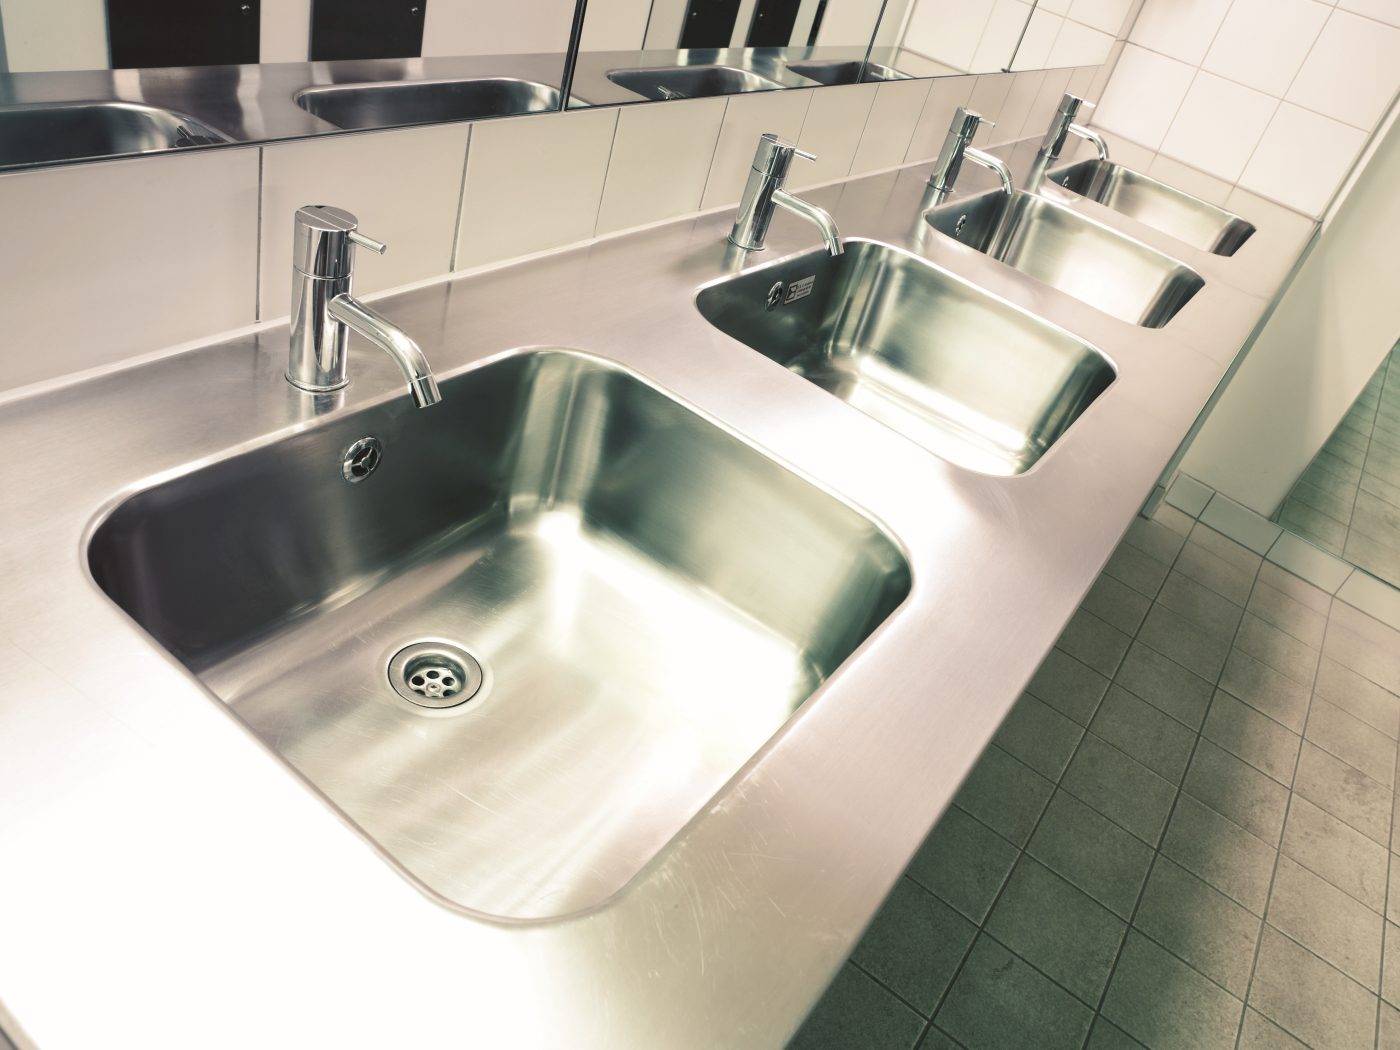 Multi-Station Wash Basin - Stainless Steel Made-to-order